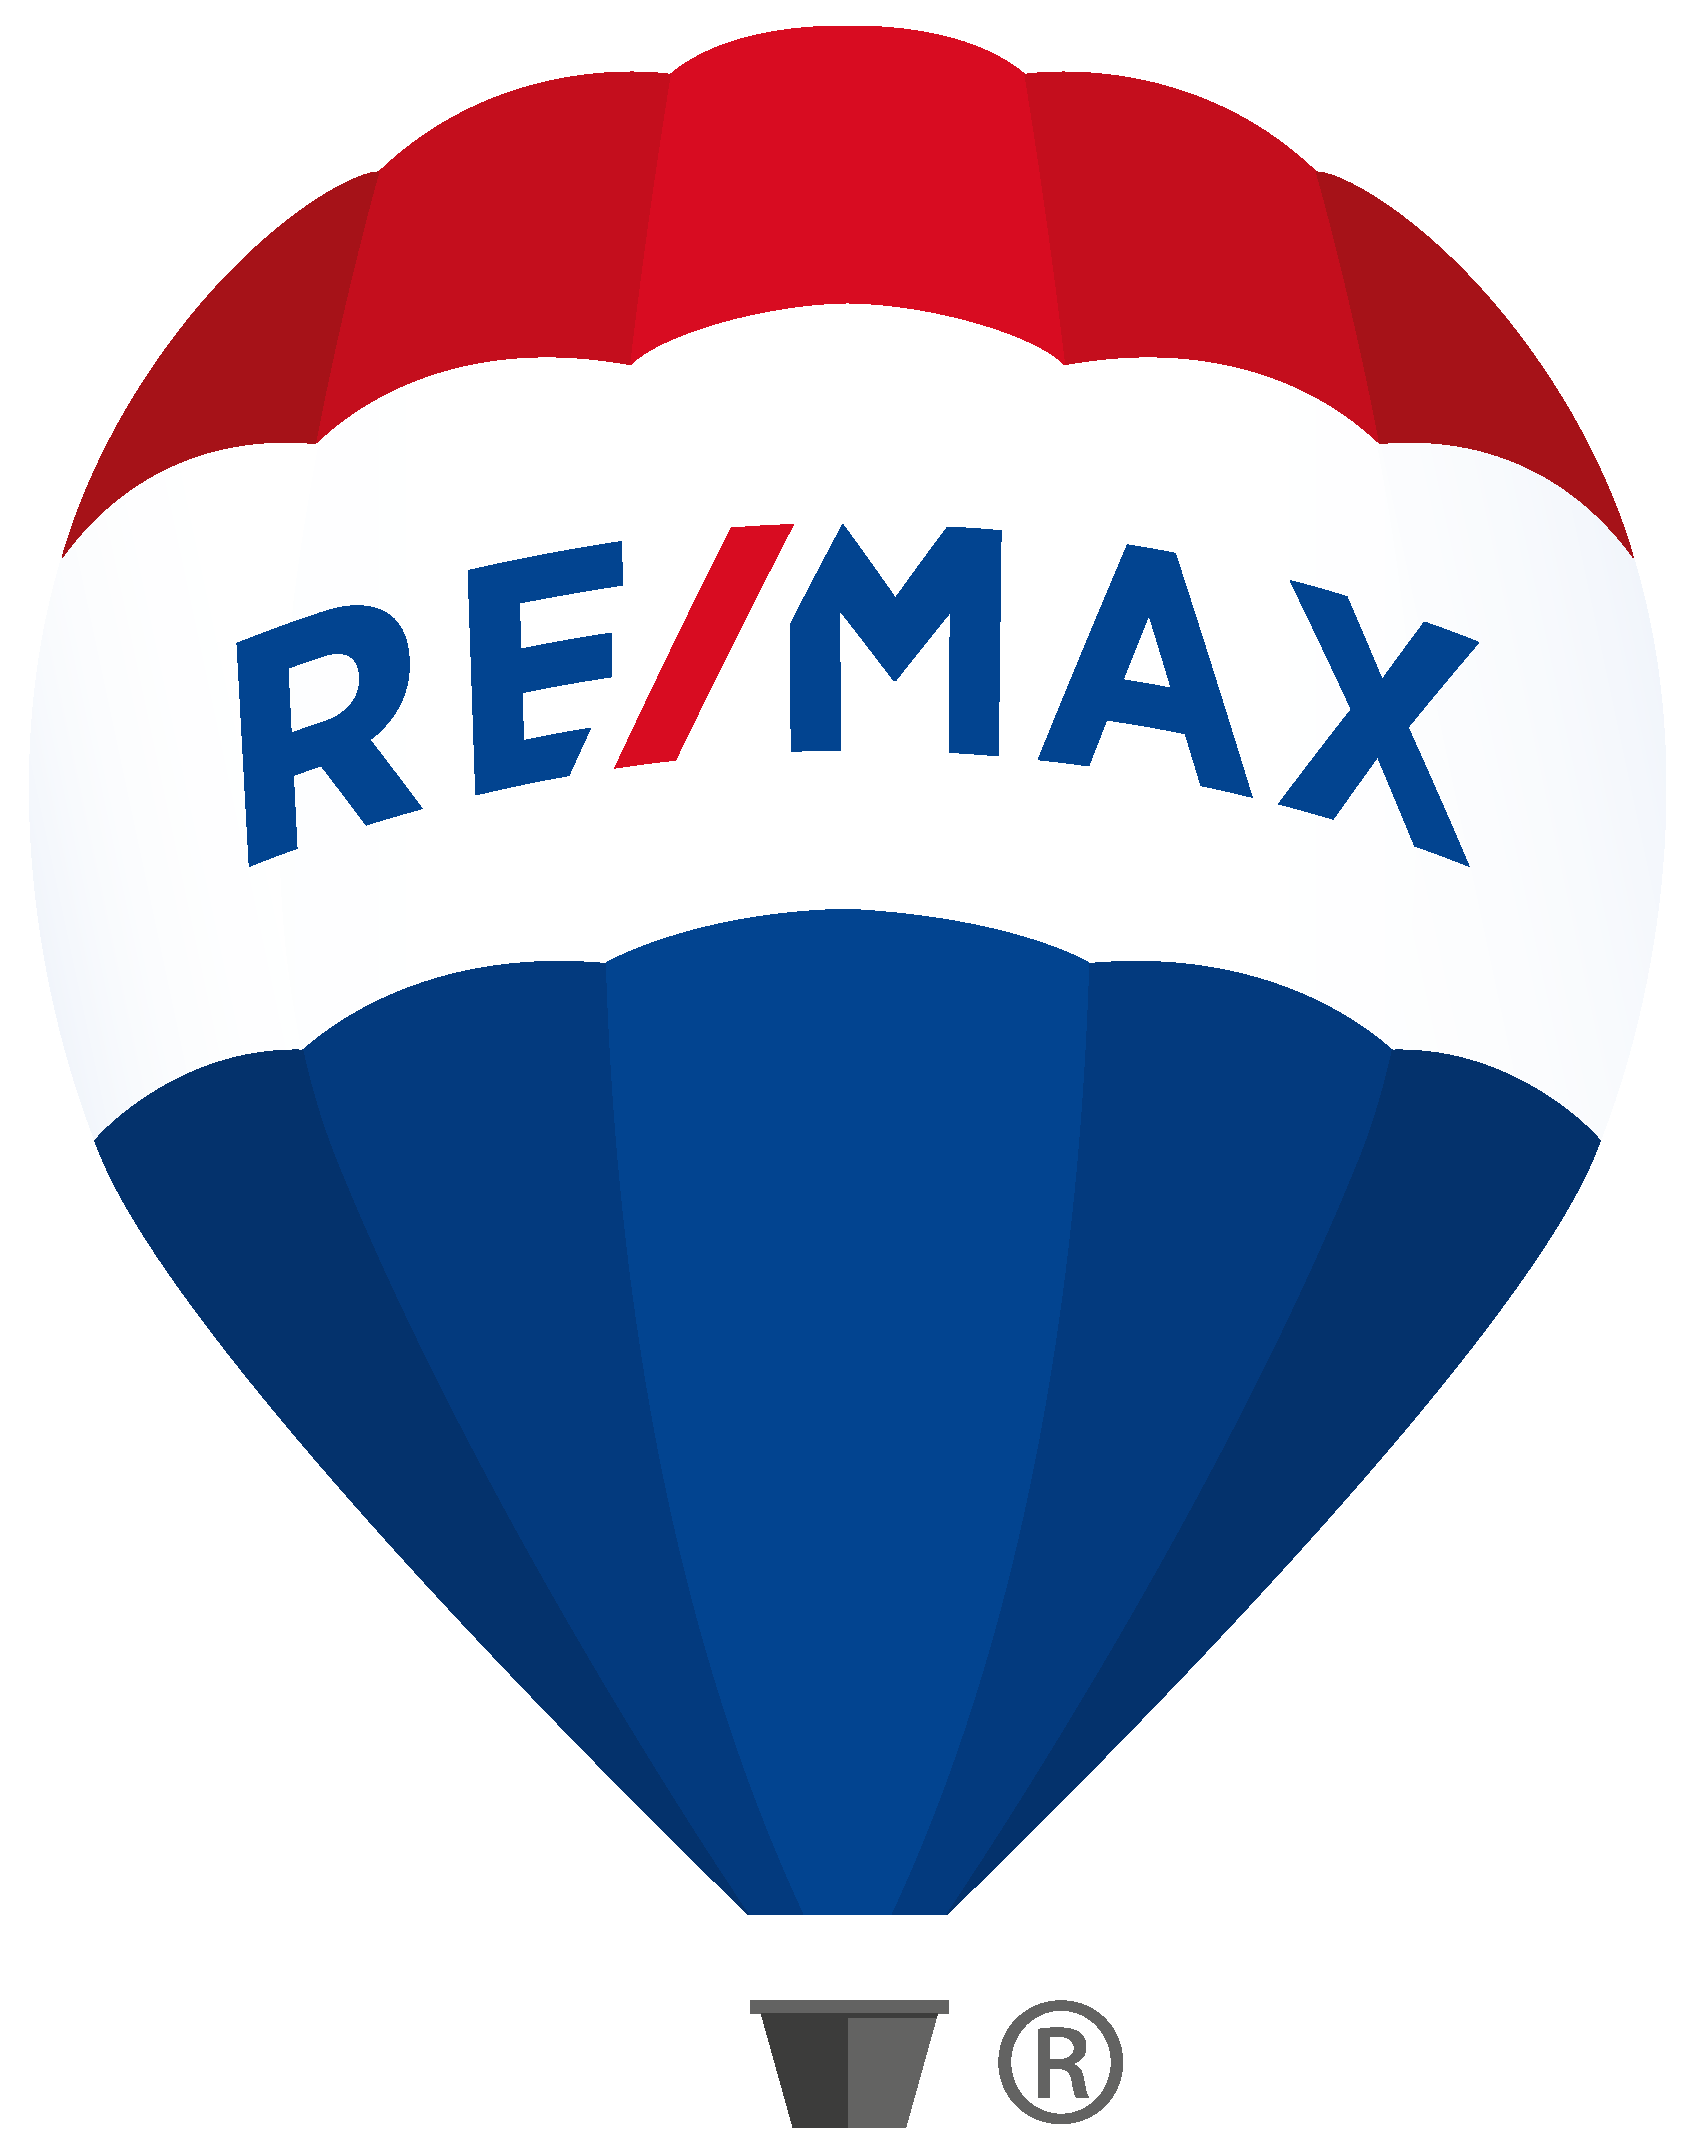 remax_balloon.png